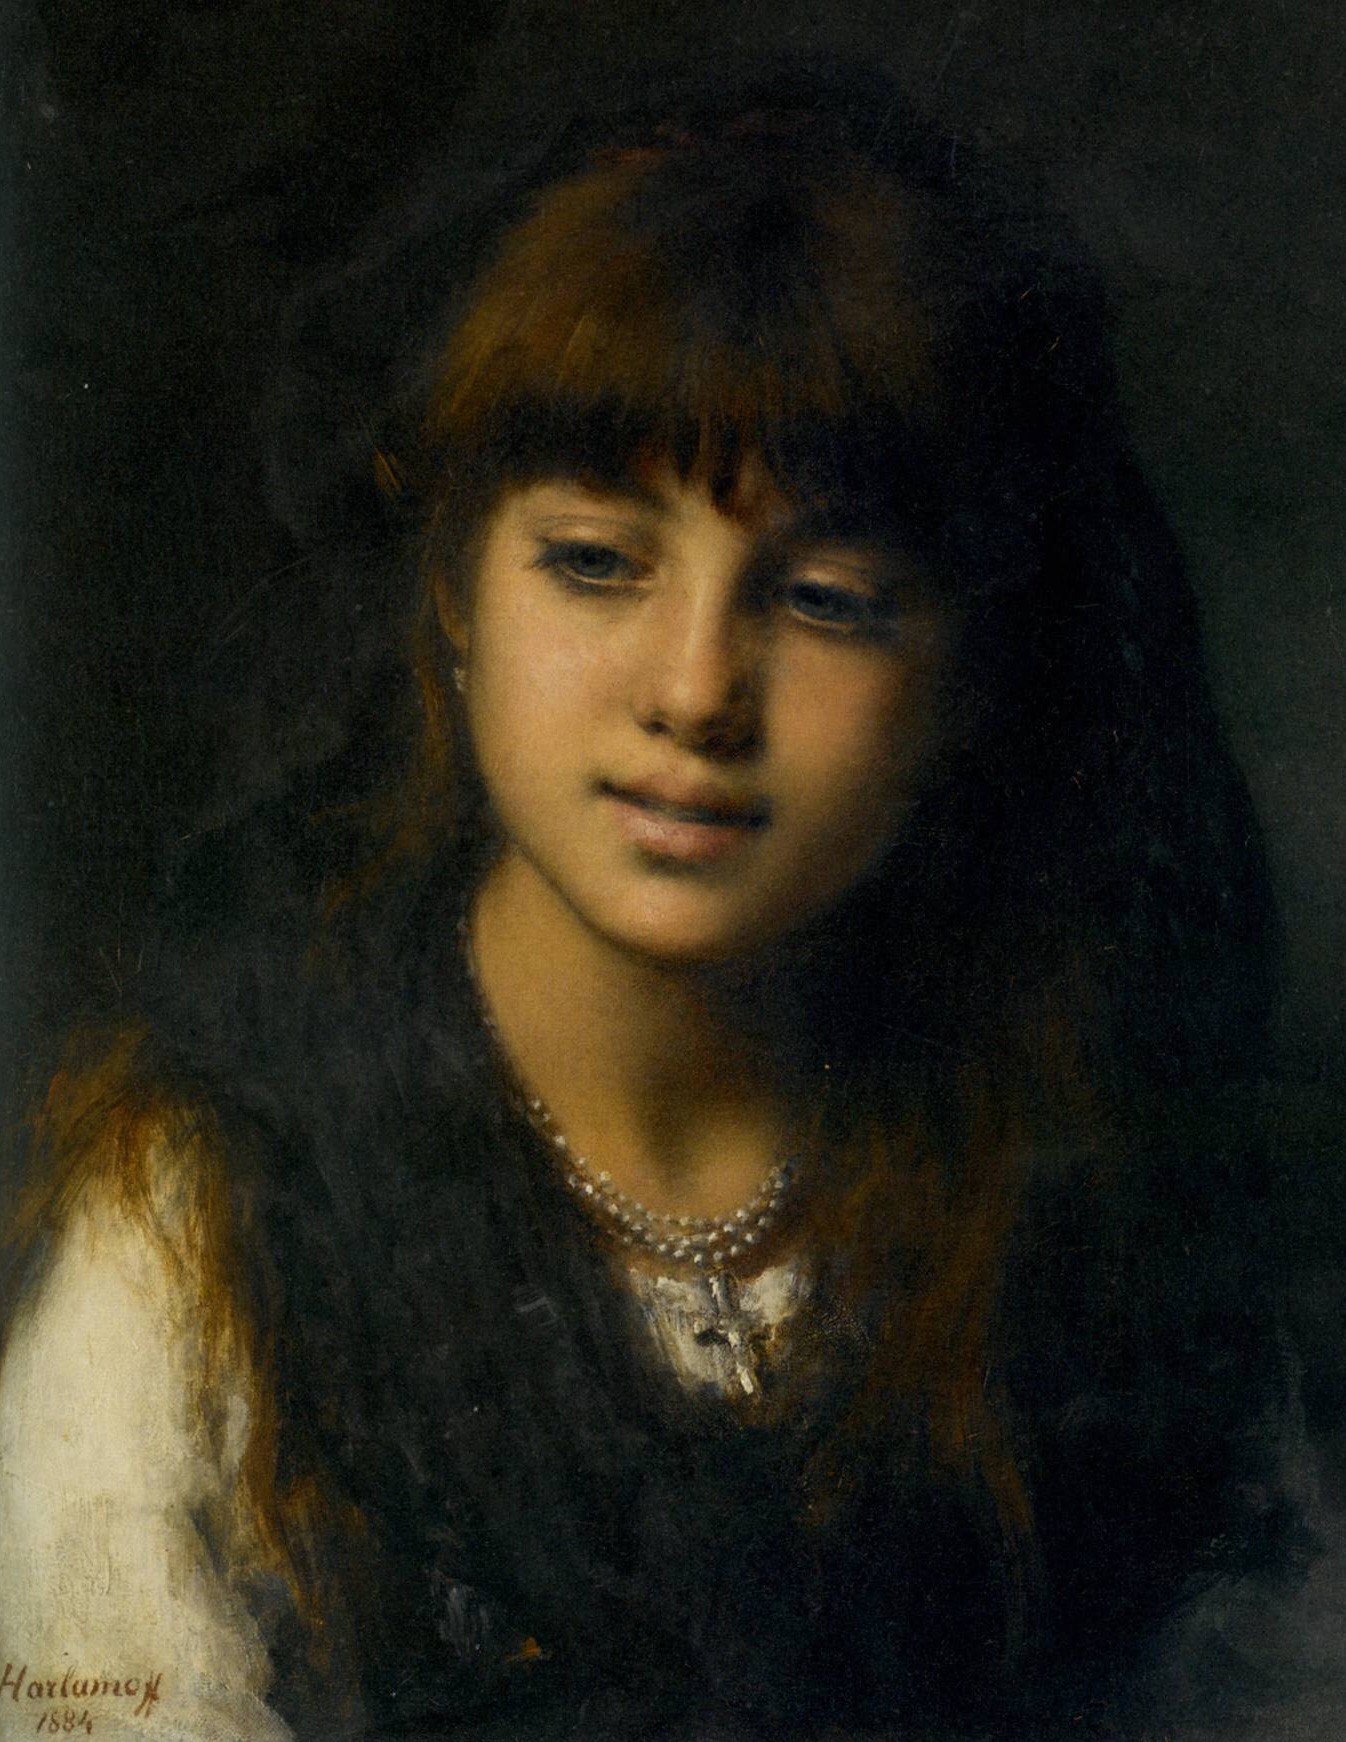 Portrait of a Young Girl, by Alexei Alexeievich Harlamoff, 1884